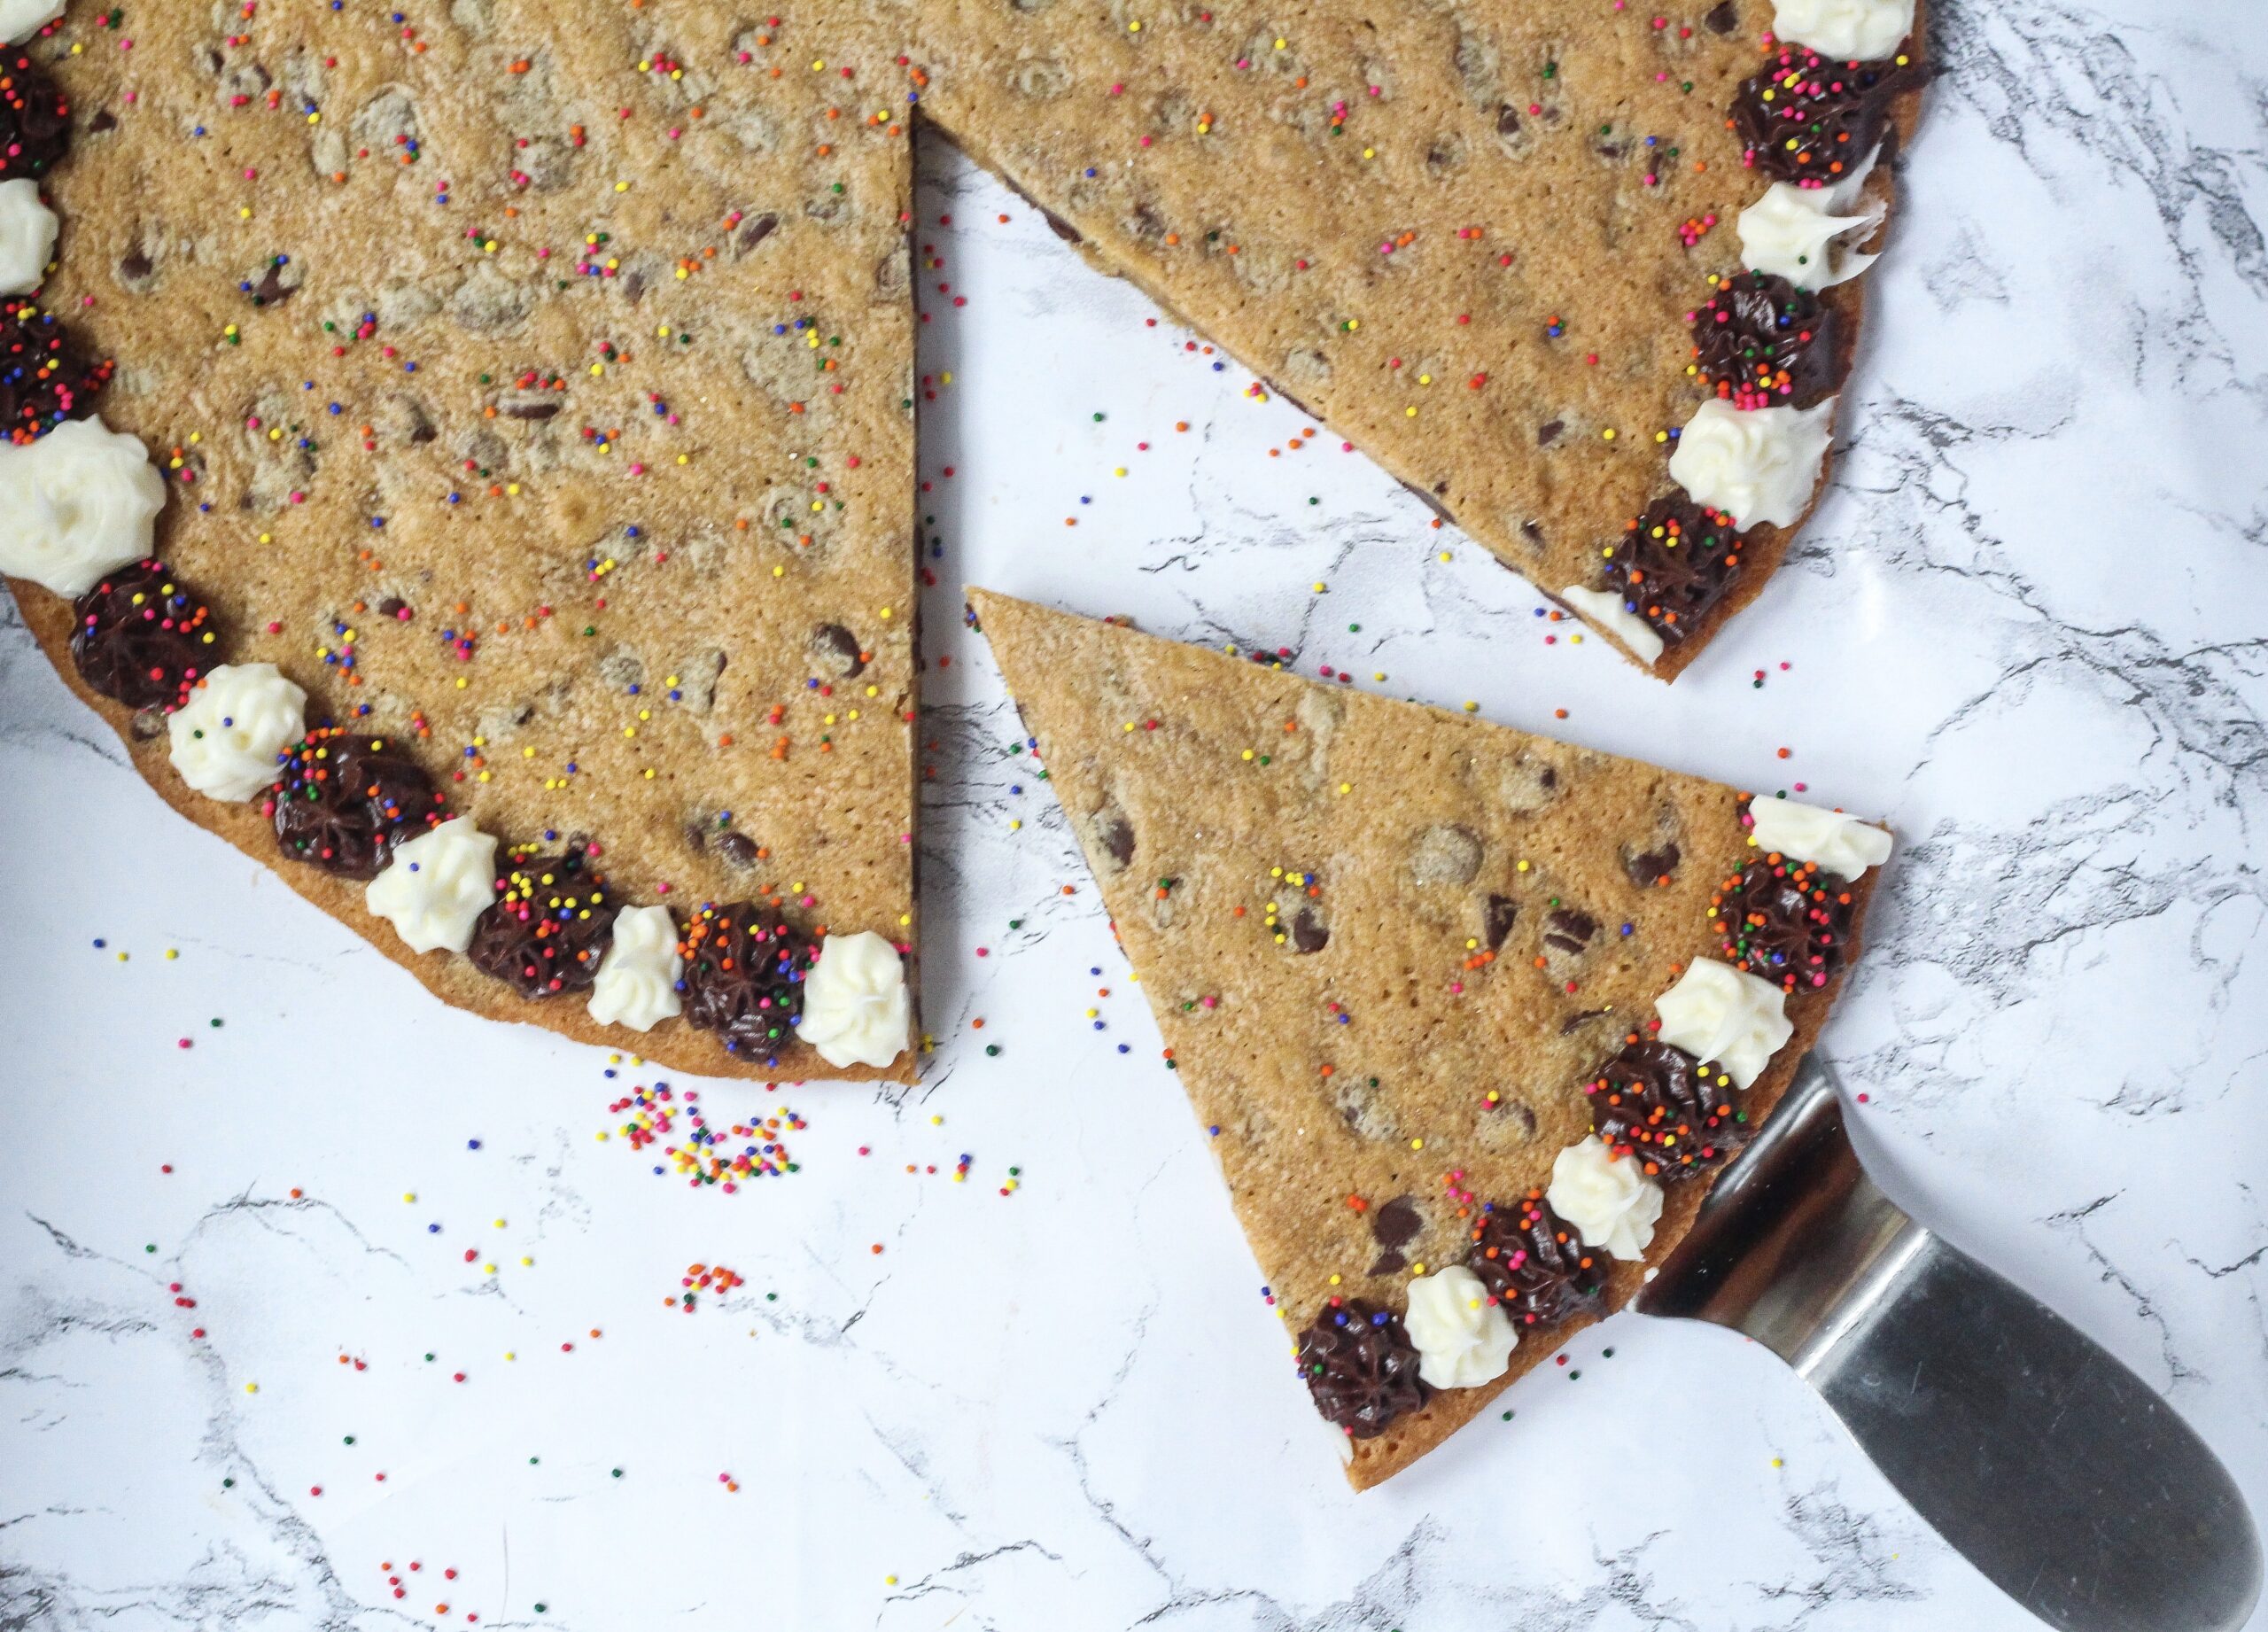 top down view of cookie cake with alternating brown and white frosting dots around the outside, and one slice pulled out part-way and angled. Multi-colored sprinkles are on the cookie as well as the marbled surface the cookie is on.